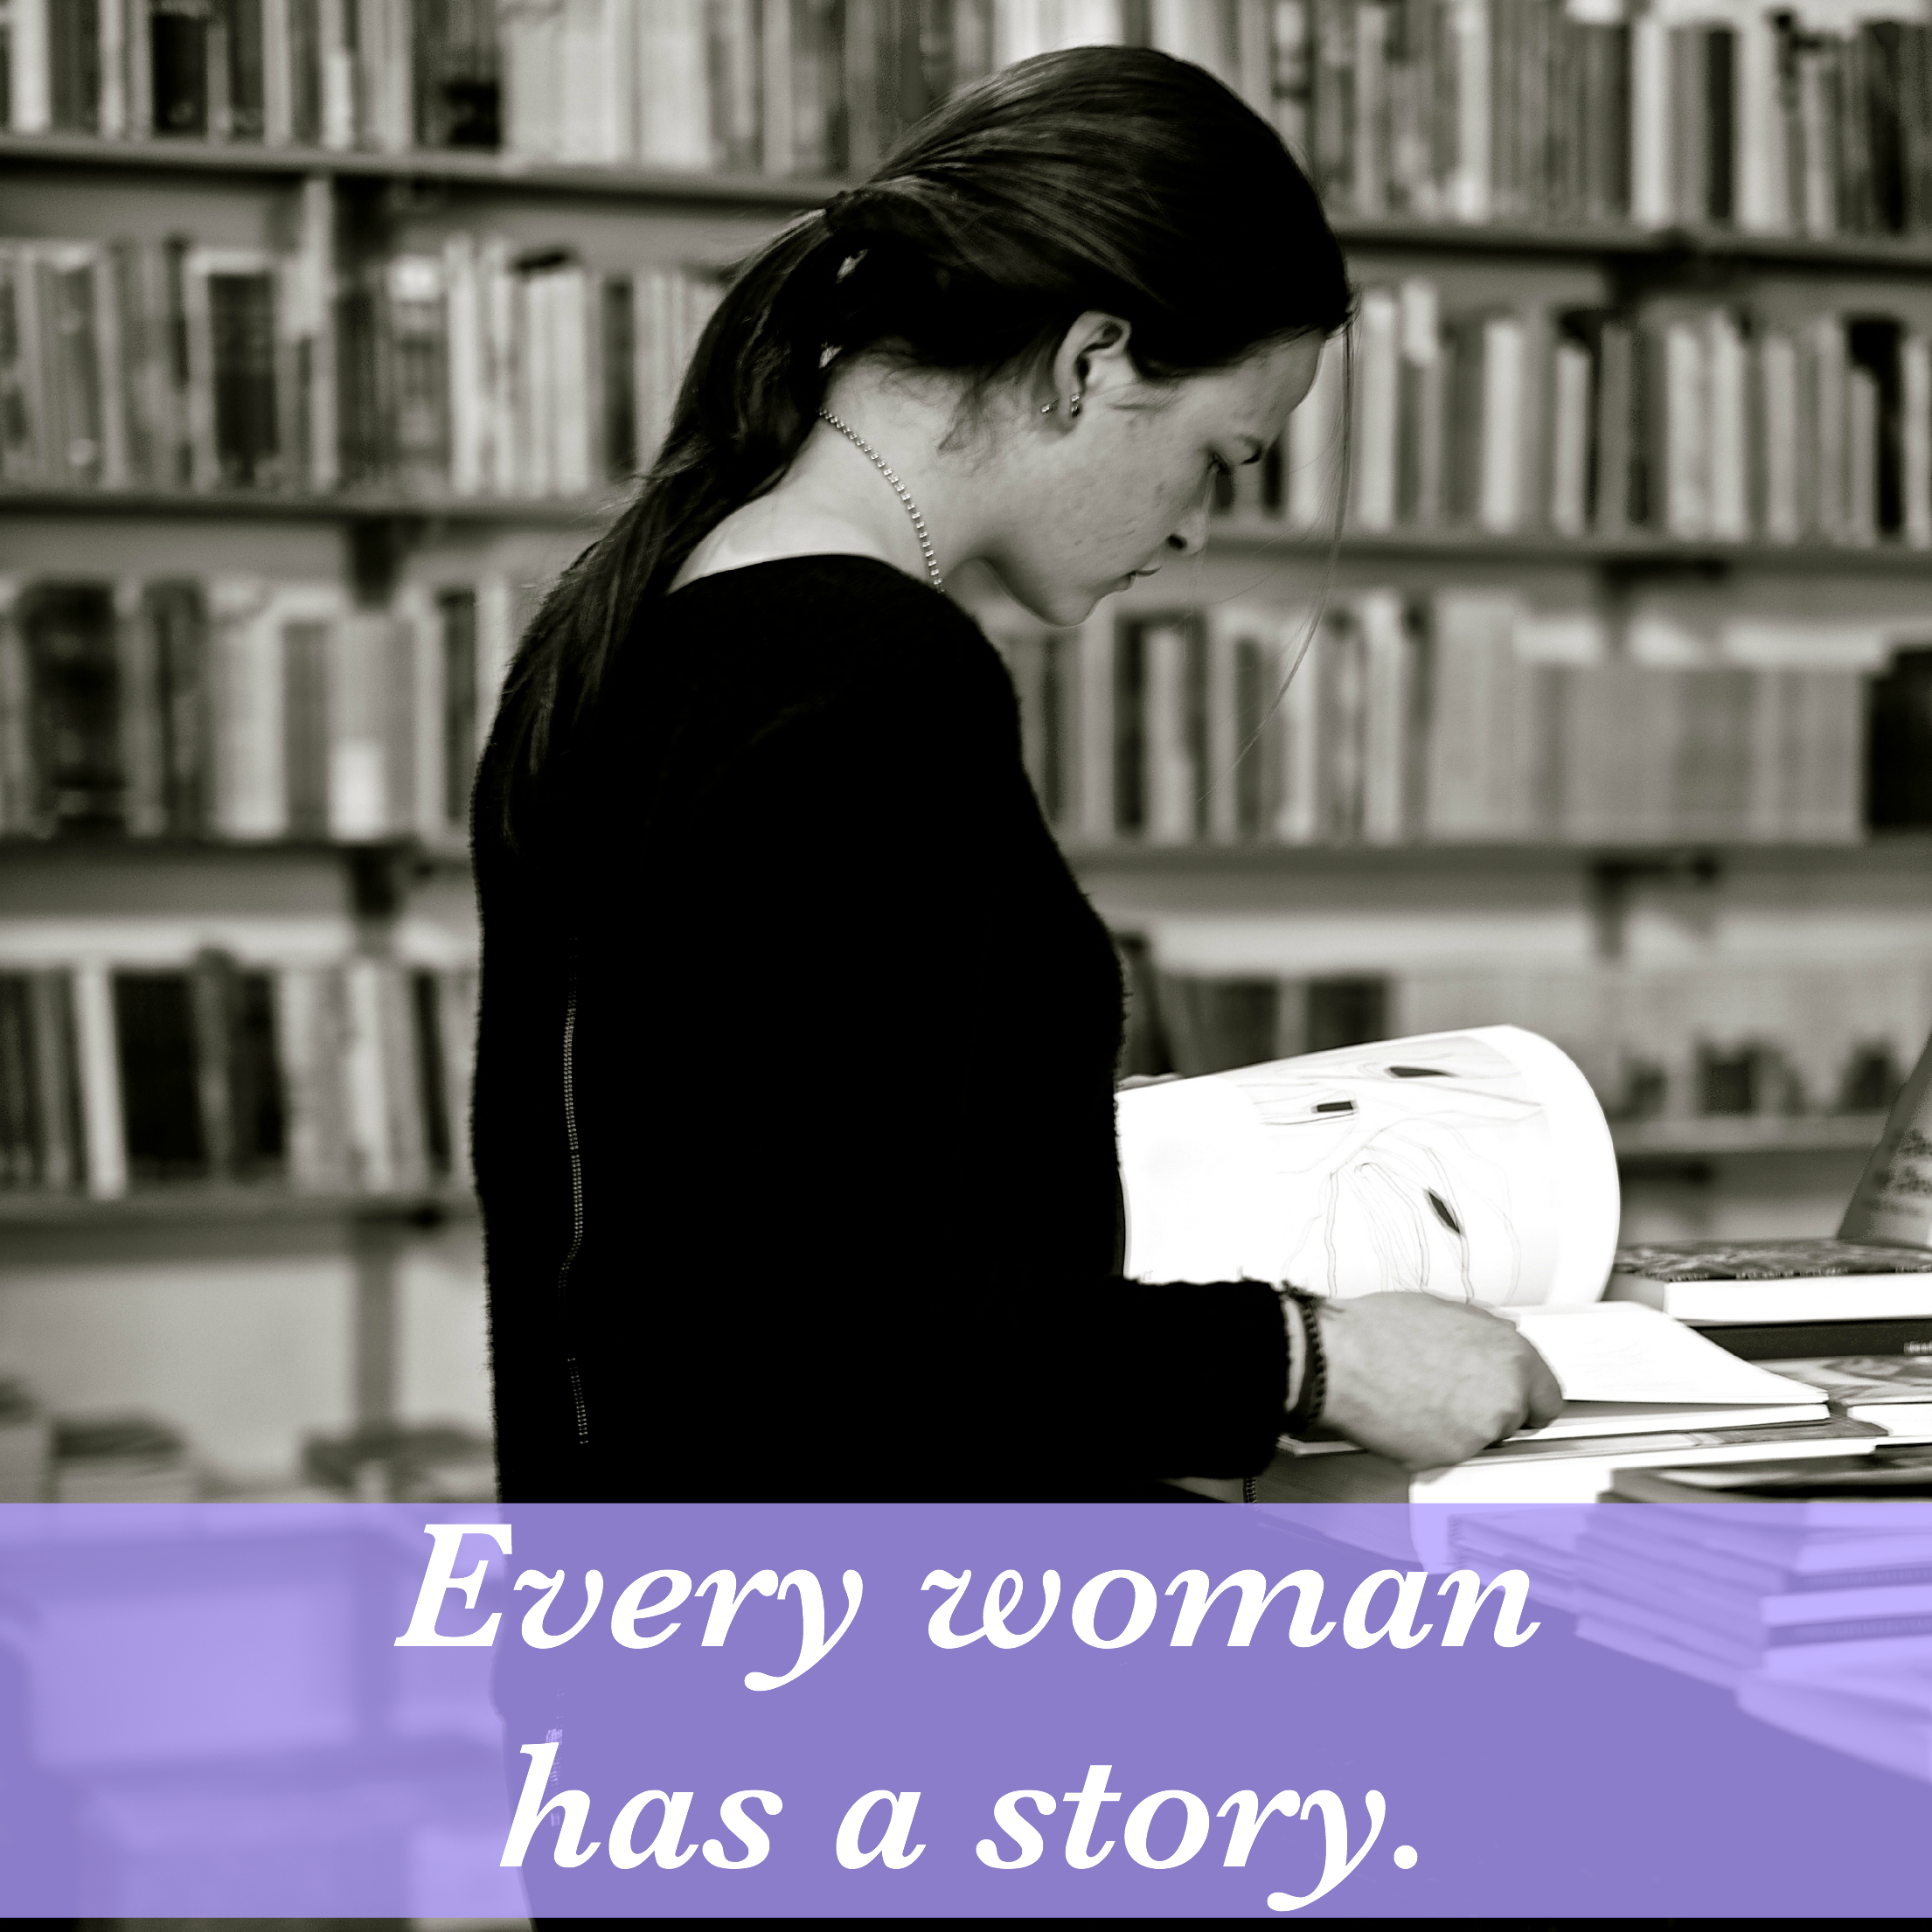 Feel Good Friday: Every Woman Has a Story